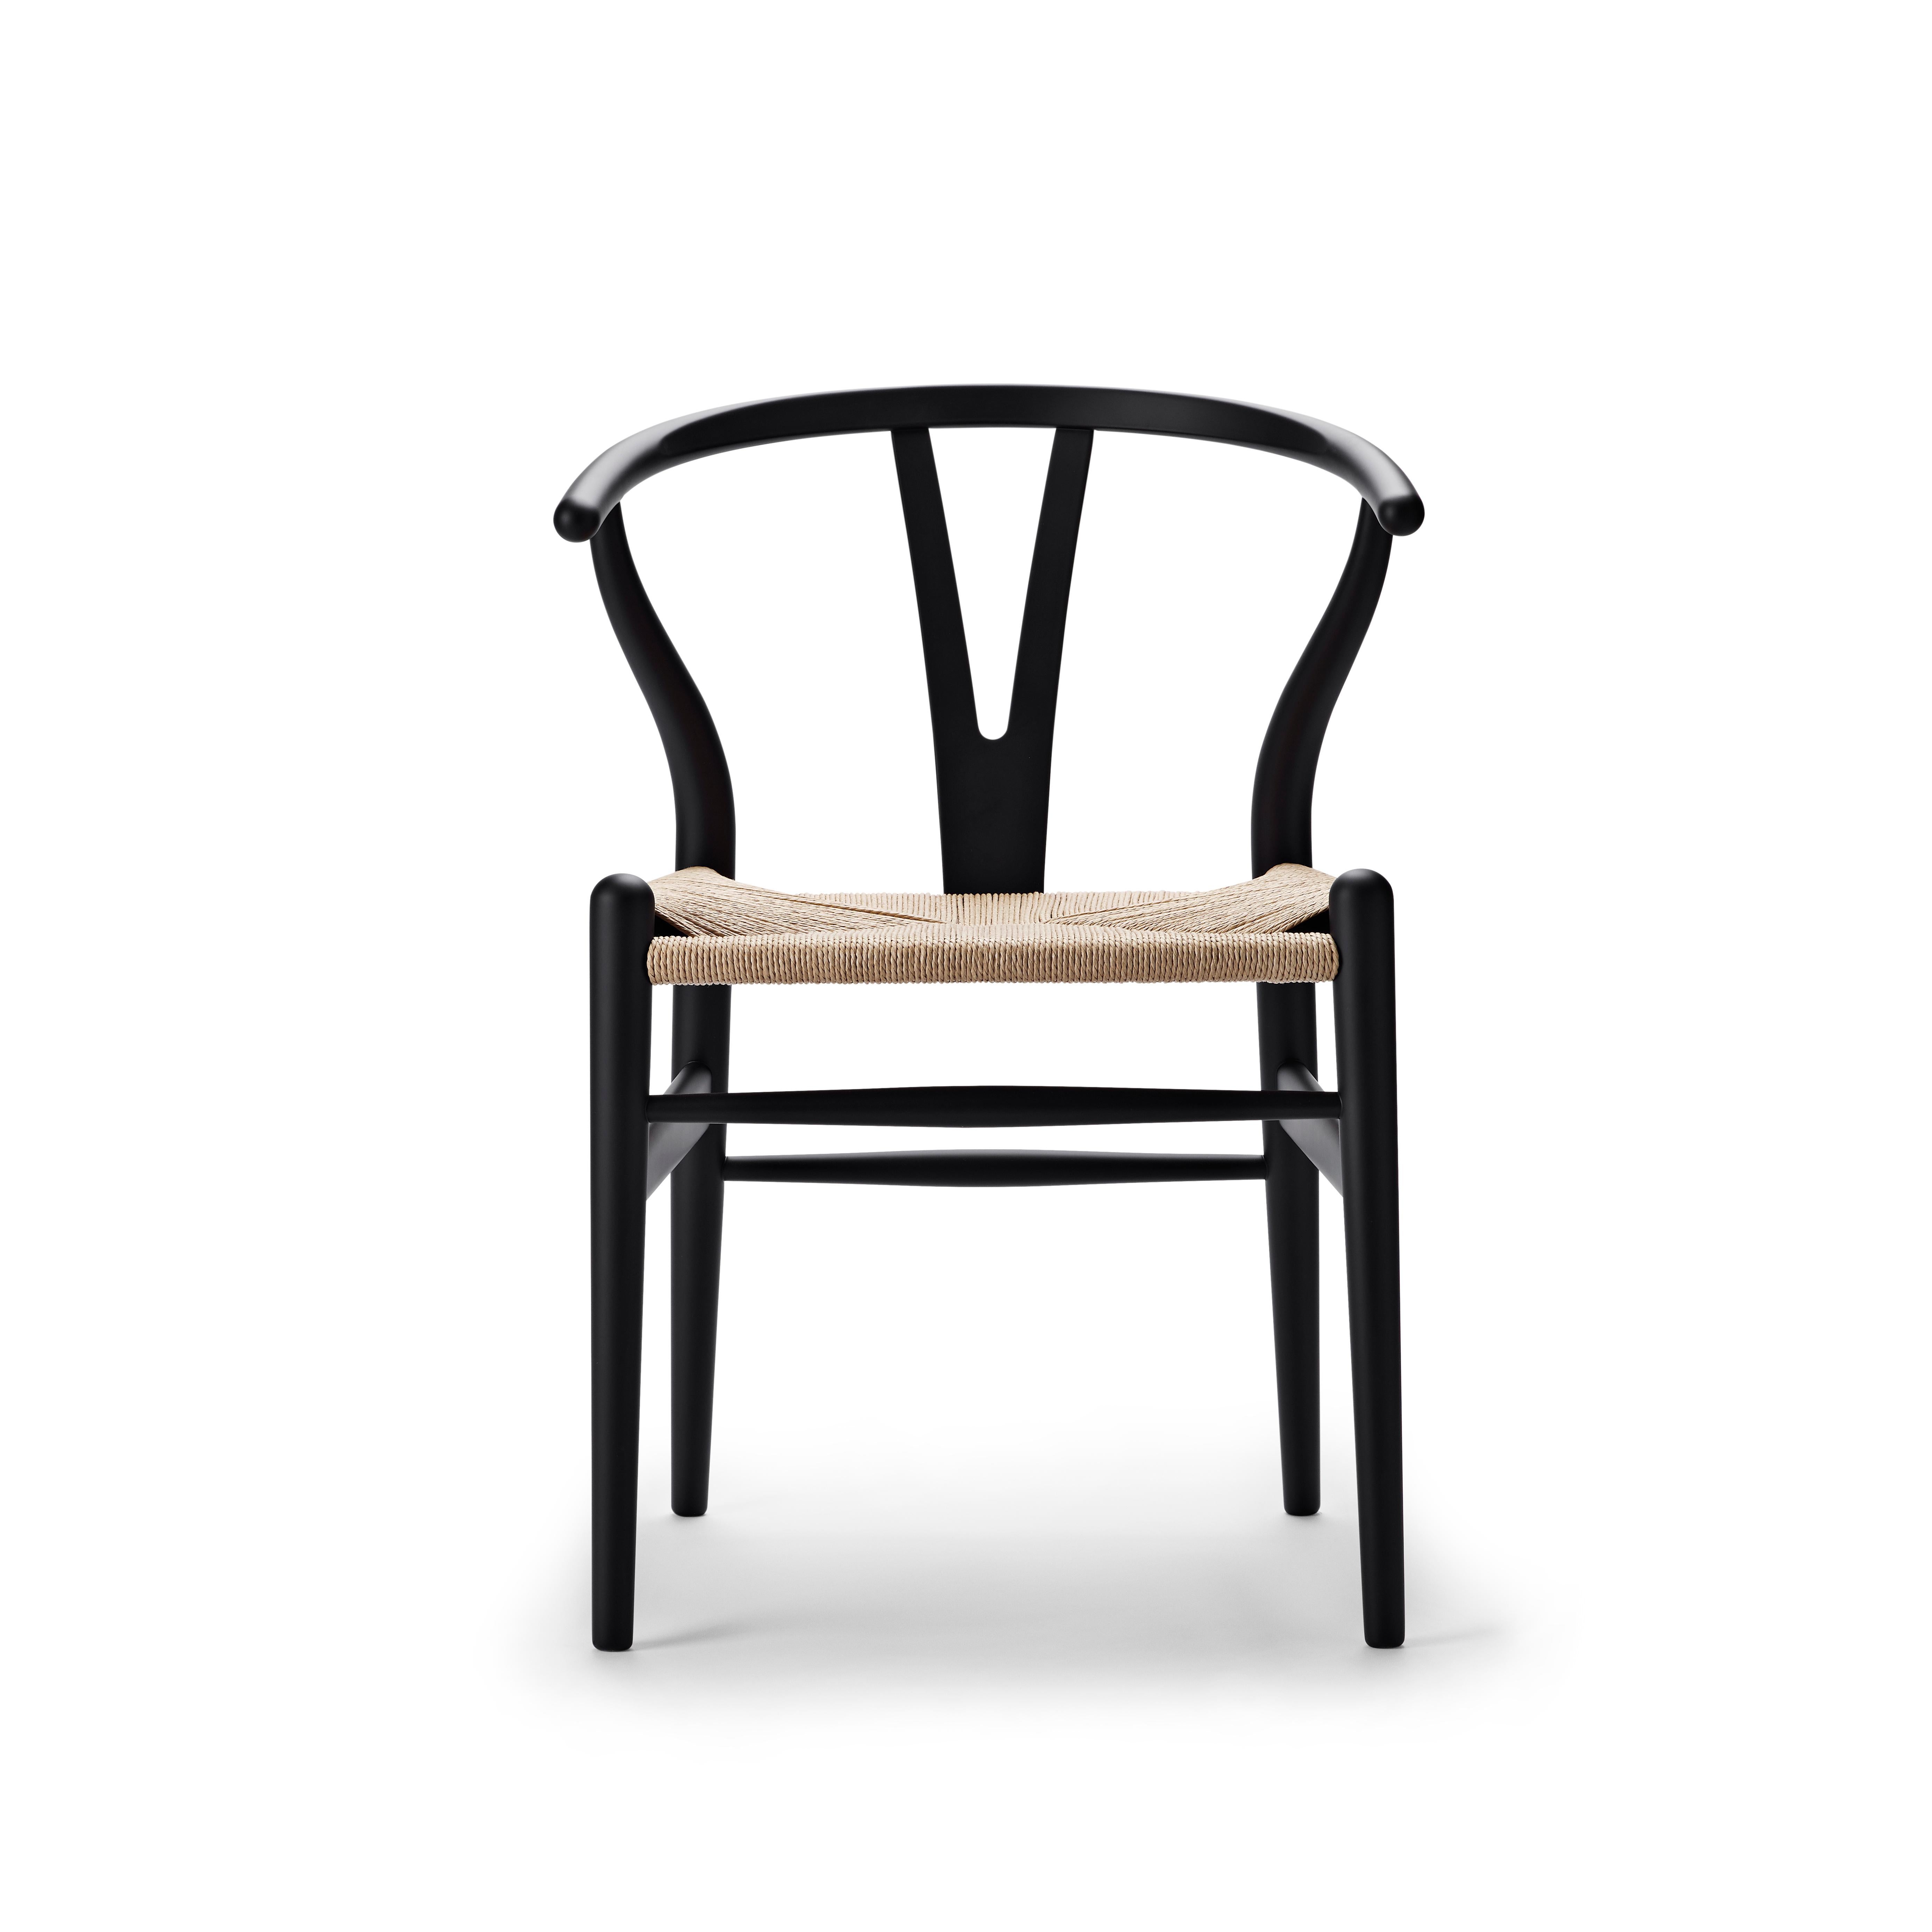 For Sale: Black (Soft Black) CH24 Wishbone Chair in Soft Colors by Hans J. Wegner